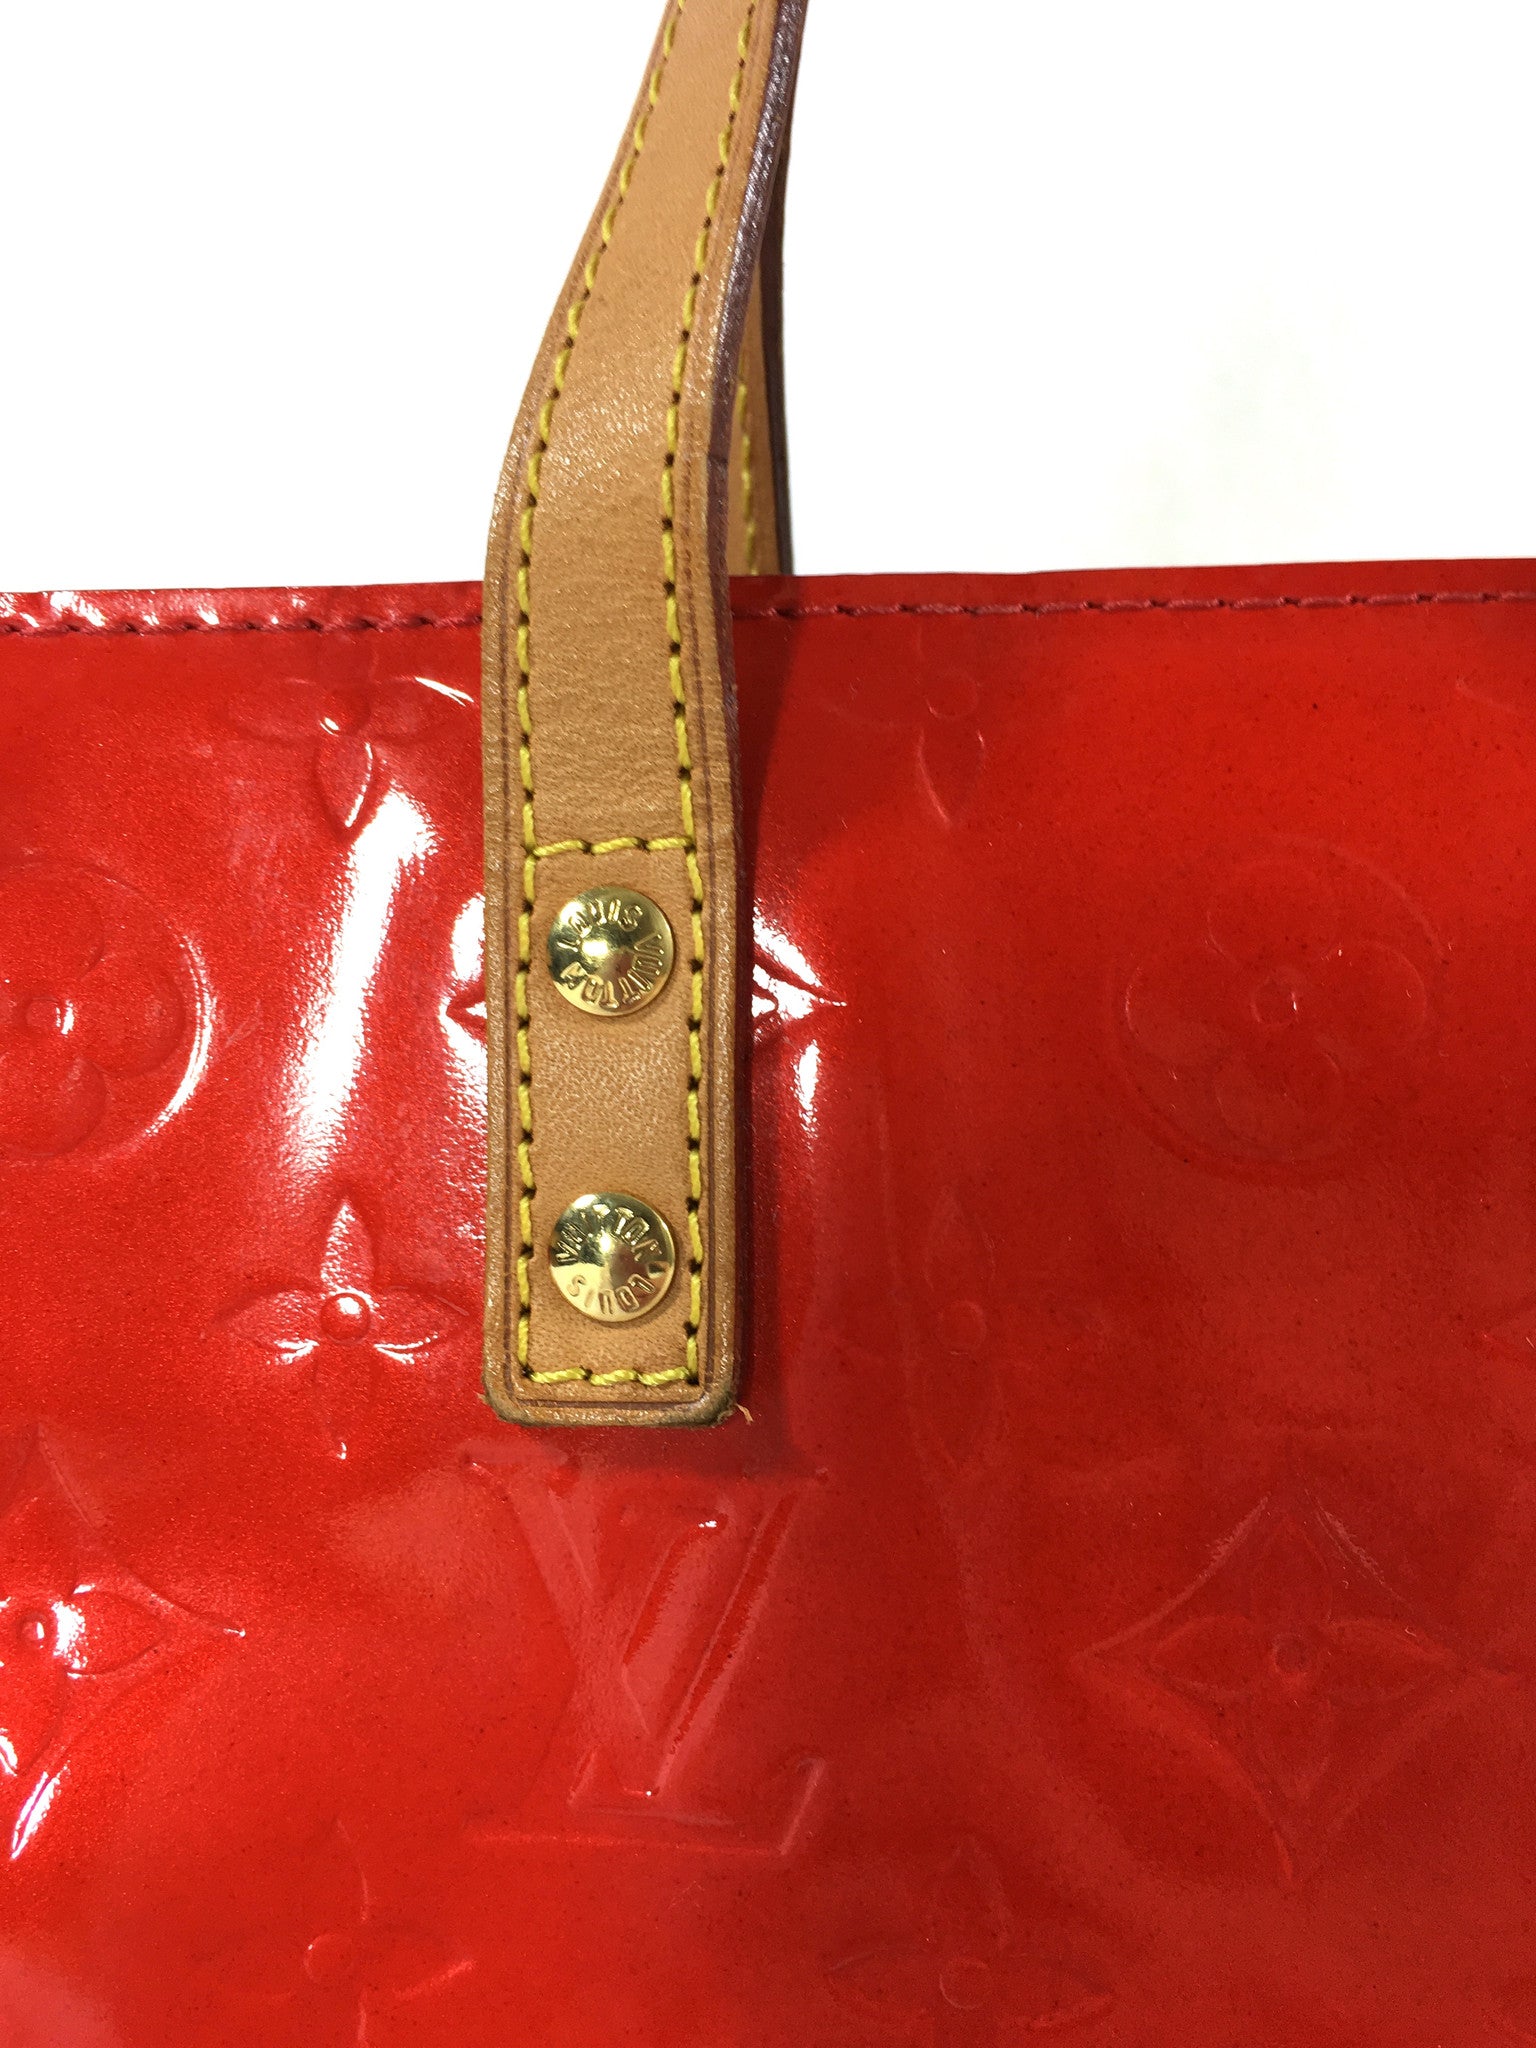 What Goes Around Comes Around Louis Vuitton Red Vernis Ab Reade Pm Tote